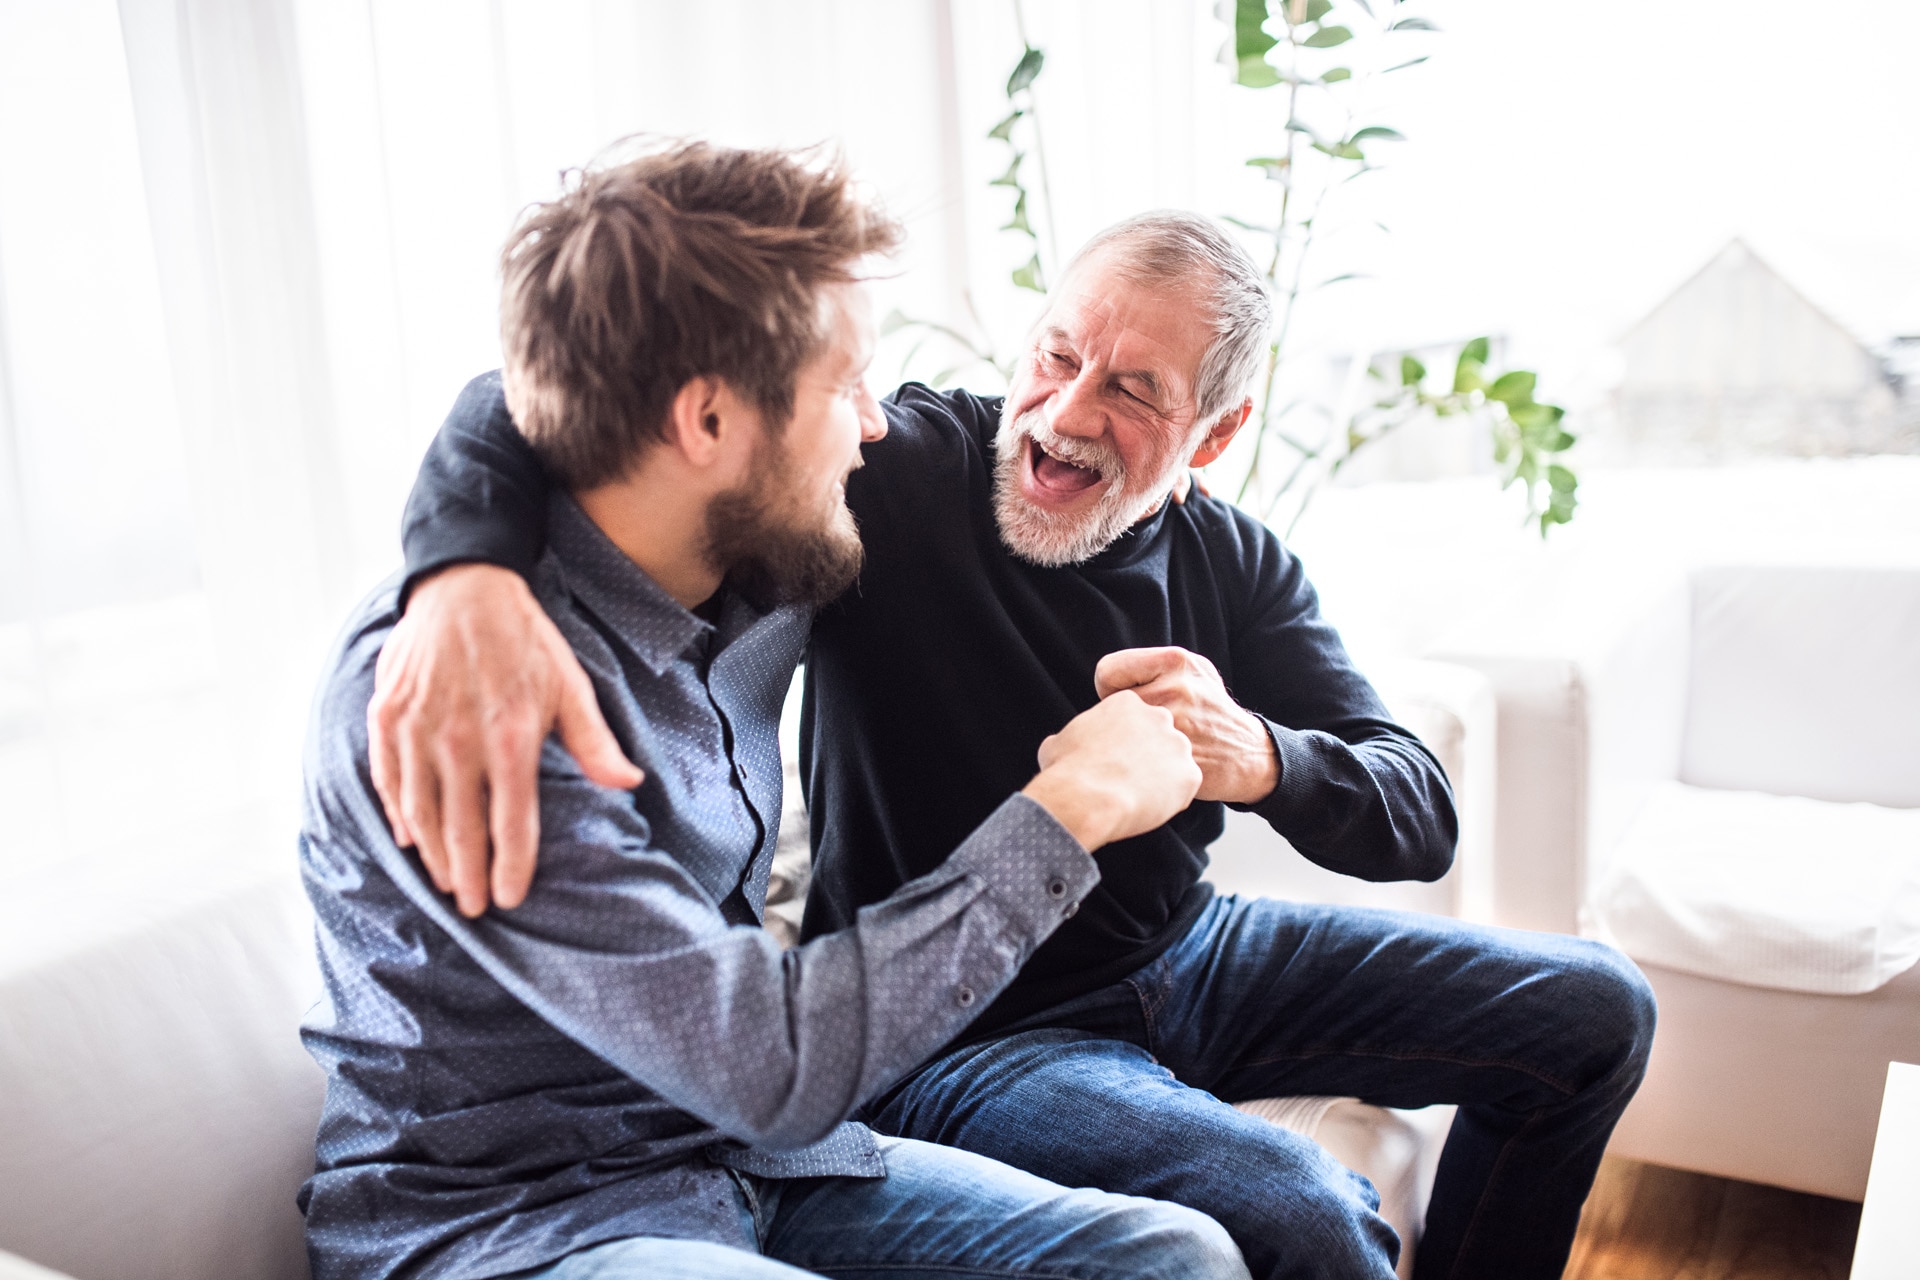 Hipster son with his senior father at home.; Shutterstock ID 794138242; purchase_order: -; job: -; client: -; other: -